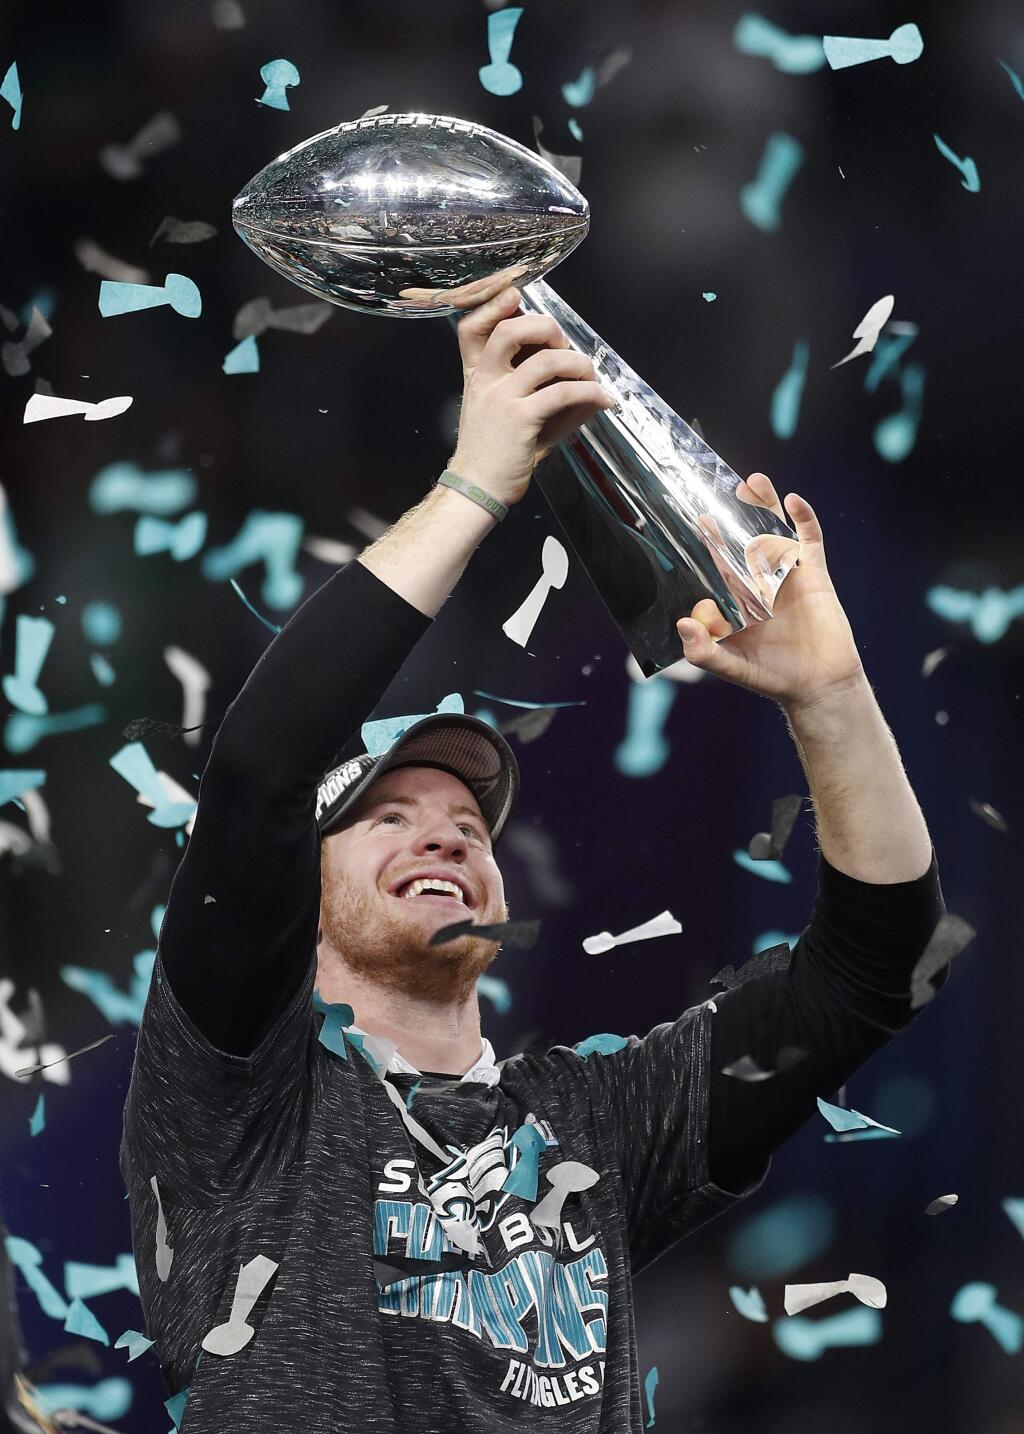 Philadelphia Eagles' Carson Wentz holds up the Vince Lombardi Trophy after the NFL Super Bowl 52 football game against the New England Patriots, Sunday, Feb. 4, 2018, in Minneapolis. The Eagles won 41-33. (AP Photo/Jeff Roberson)